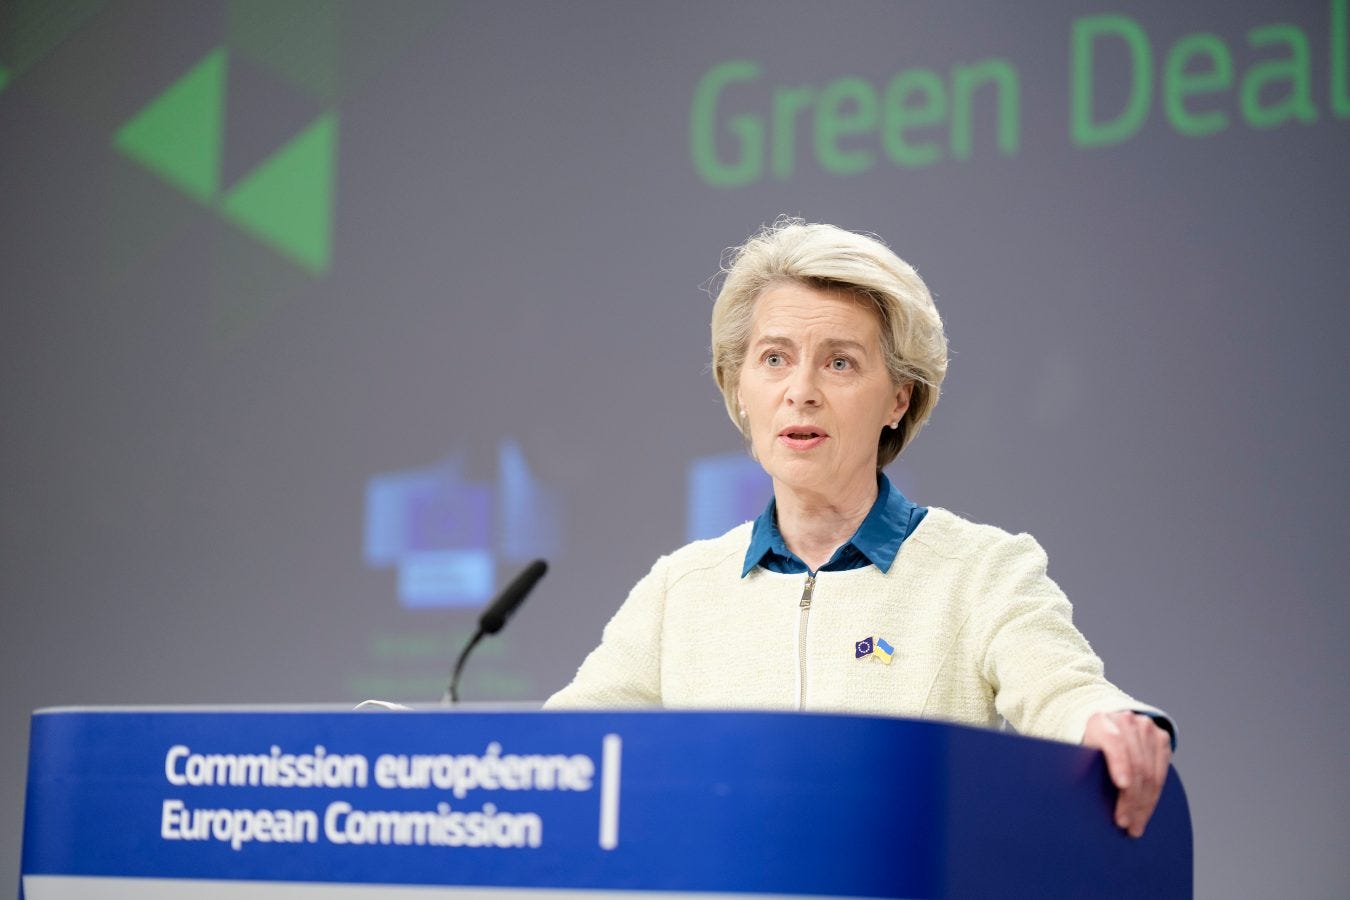 EU comes up with its own Green Deal of $270 billion | Grist